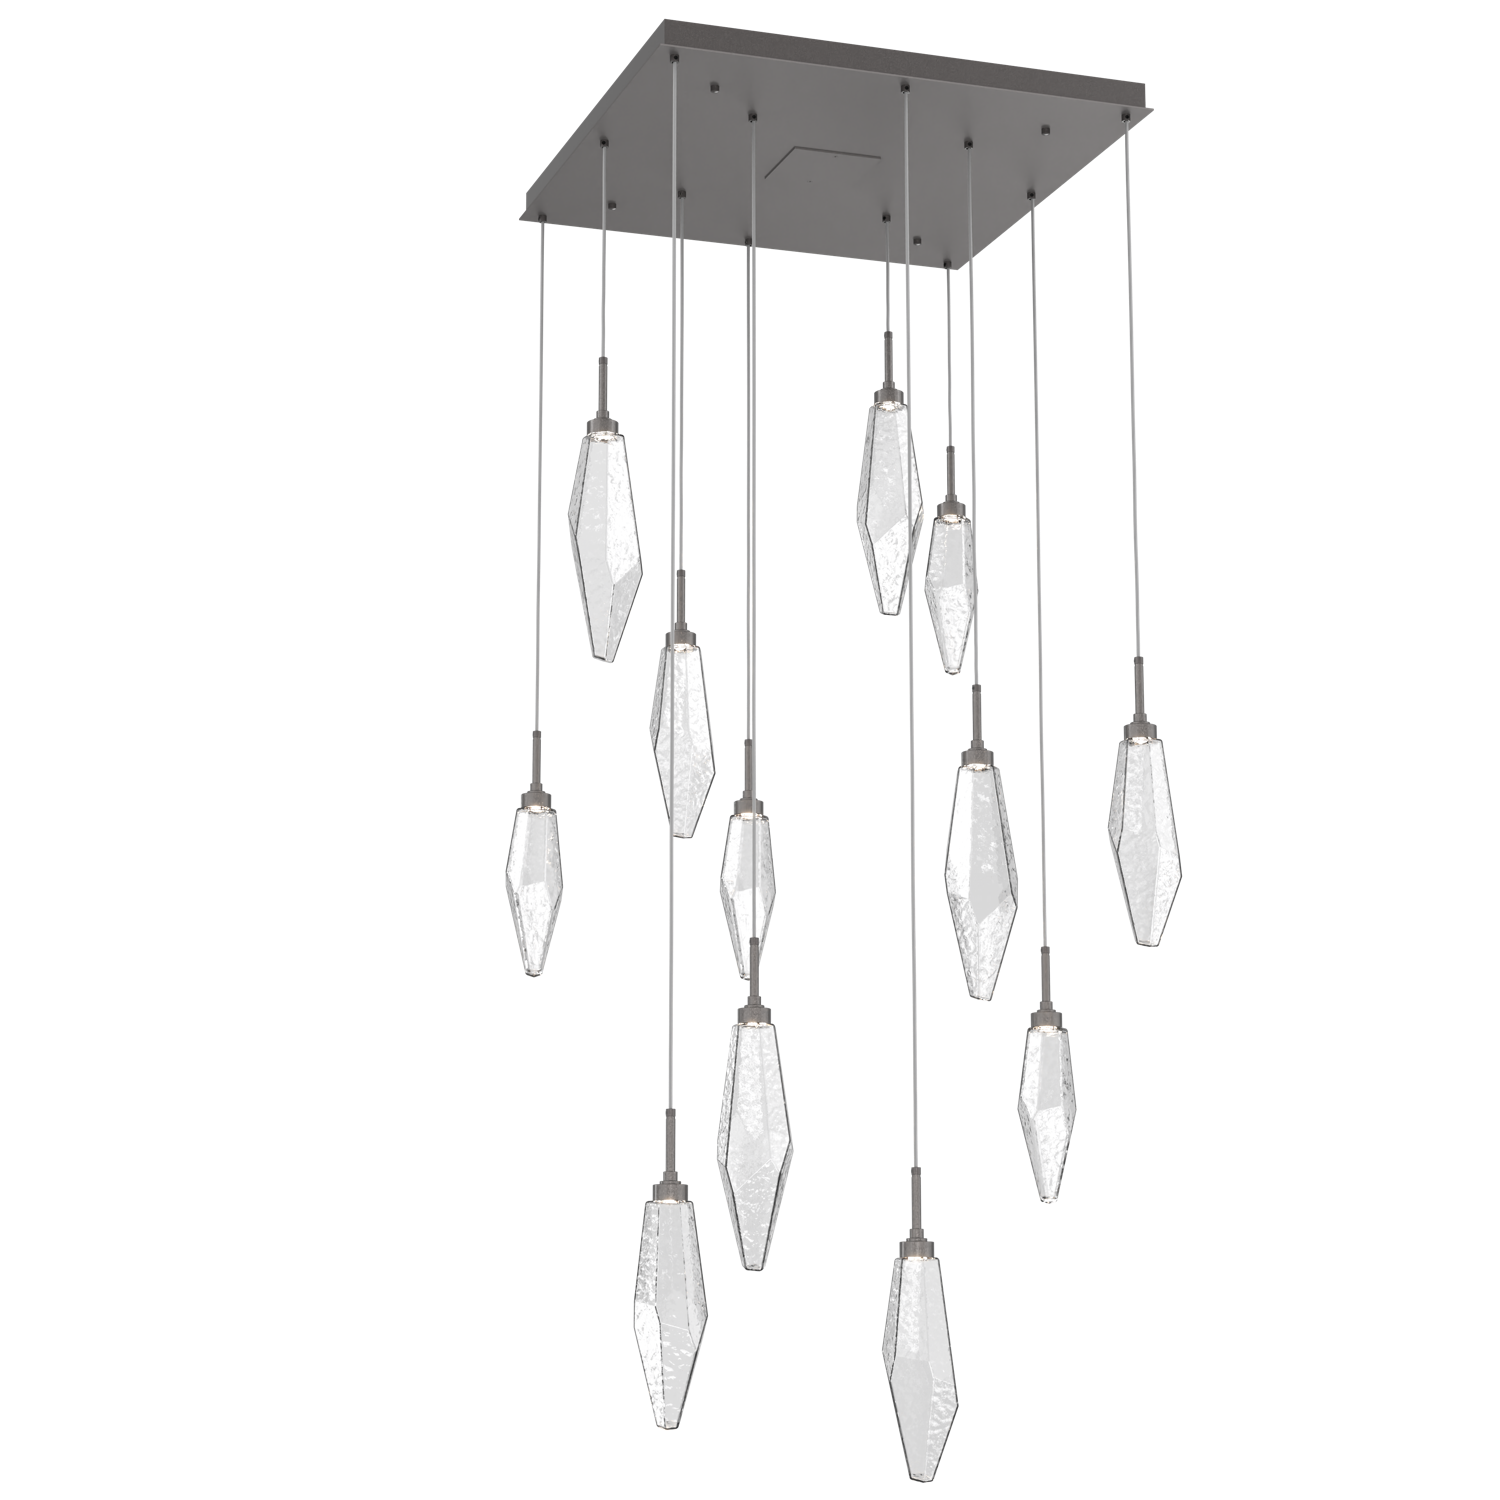 CHB0050-12-GP-CC-Hammerton-Studio-Rock-Crystal-12-light-square-pendant-chandelier-with-graphite-finish-and-clear-glass-shades-and-LED-lamping